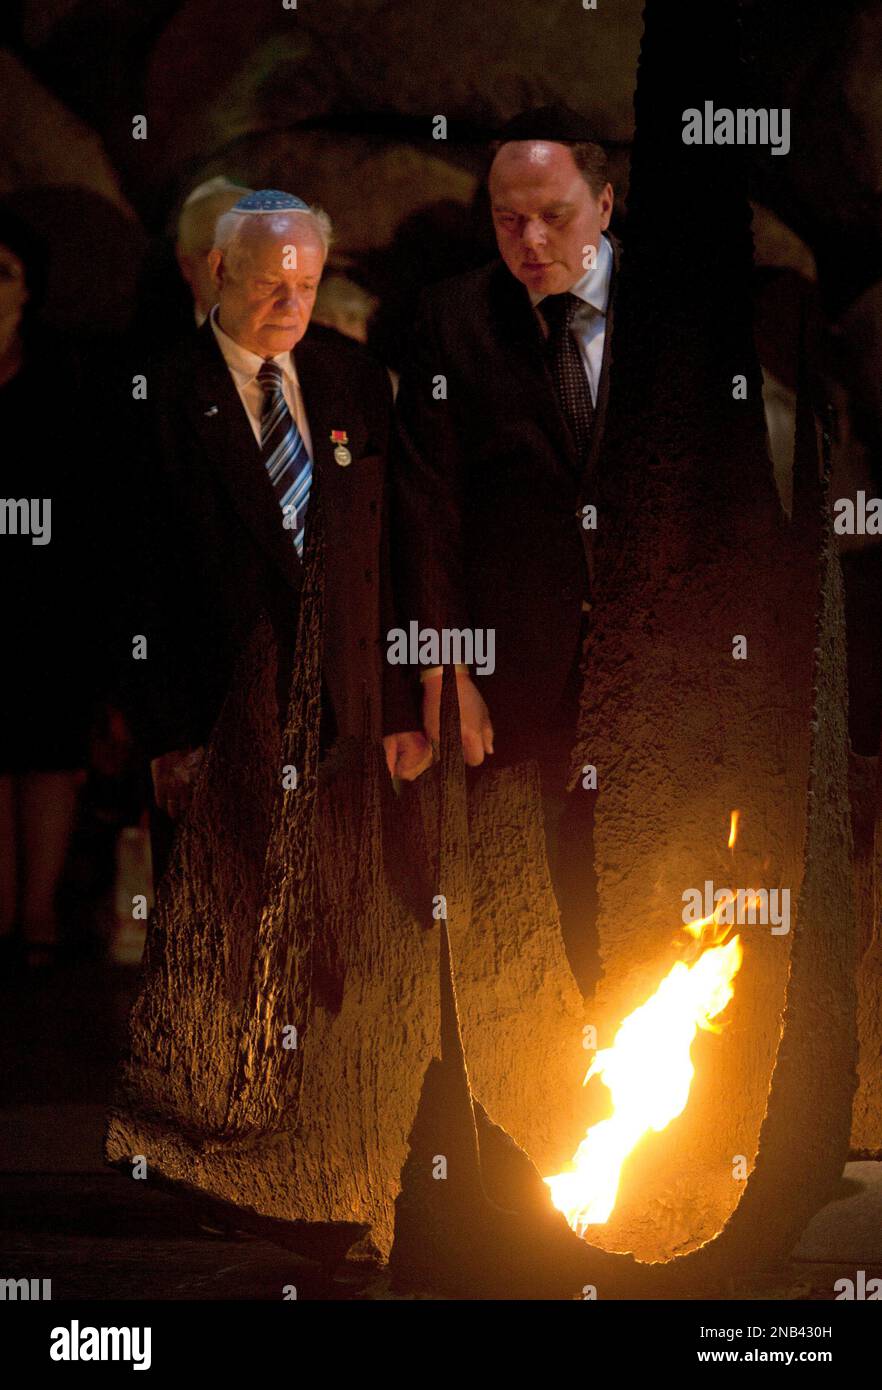 Michael Sidko, 76, left, one of the lone survivors of the Babi Yar massacre in which the Nazis gunned down 33,771 Jews over two days in 1941, rekindles the Eternal Flame during a ceremony marking 70 years since the massacre, at the Hall of Remembrance at the Yad Vashem Holocaust memorial, in Jerusalem, Thursday, Oct. 6, 2011. The Nazi invasion of the Soviet Union in June 1941 marked a turning point in the German plan to "solve the Jewish problem," with the establishment of the Einsatzgruppen paramilitary death squads. Babi Yar was one of the first mass killing sites.(AP Photo/Sebastian Scheine Stockfoto